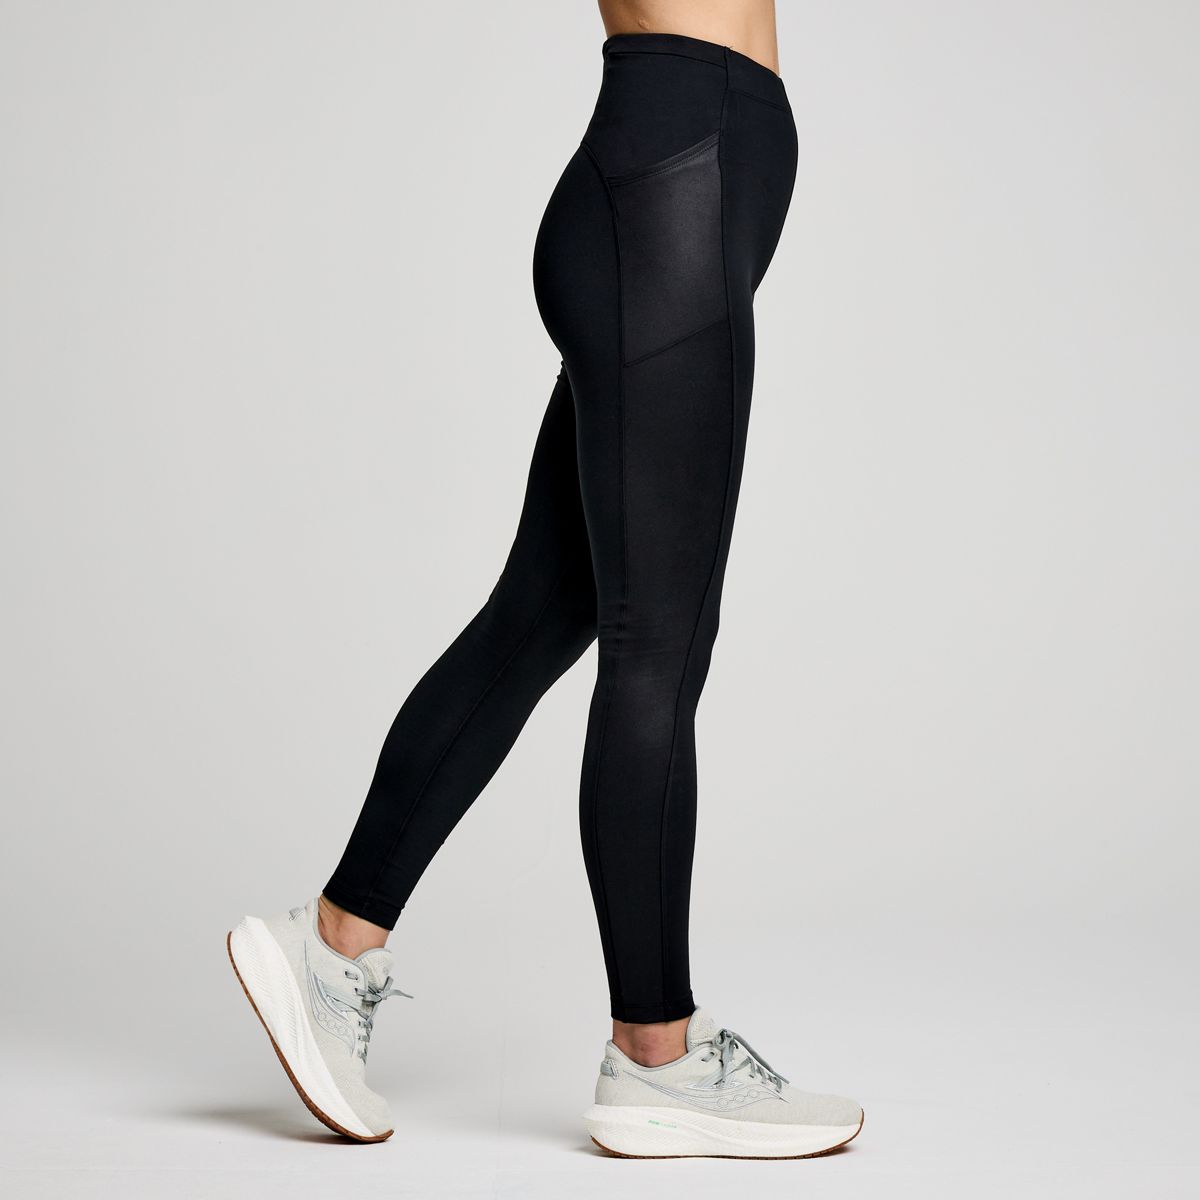 Women's Solstice Tight - View All